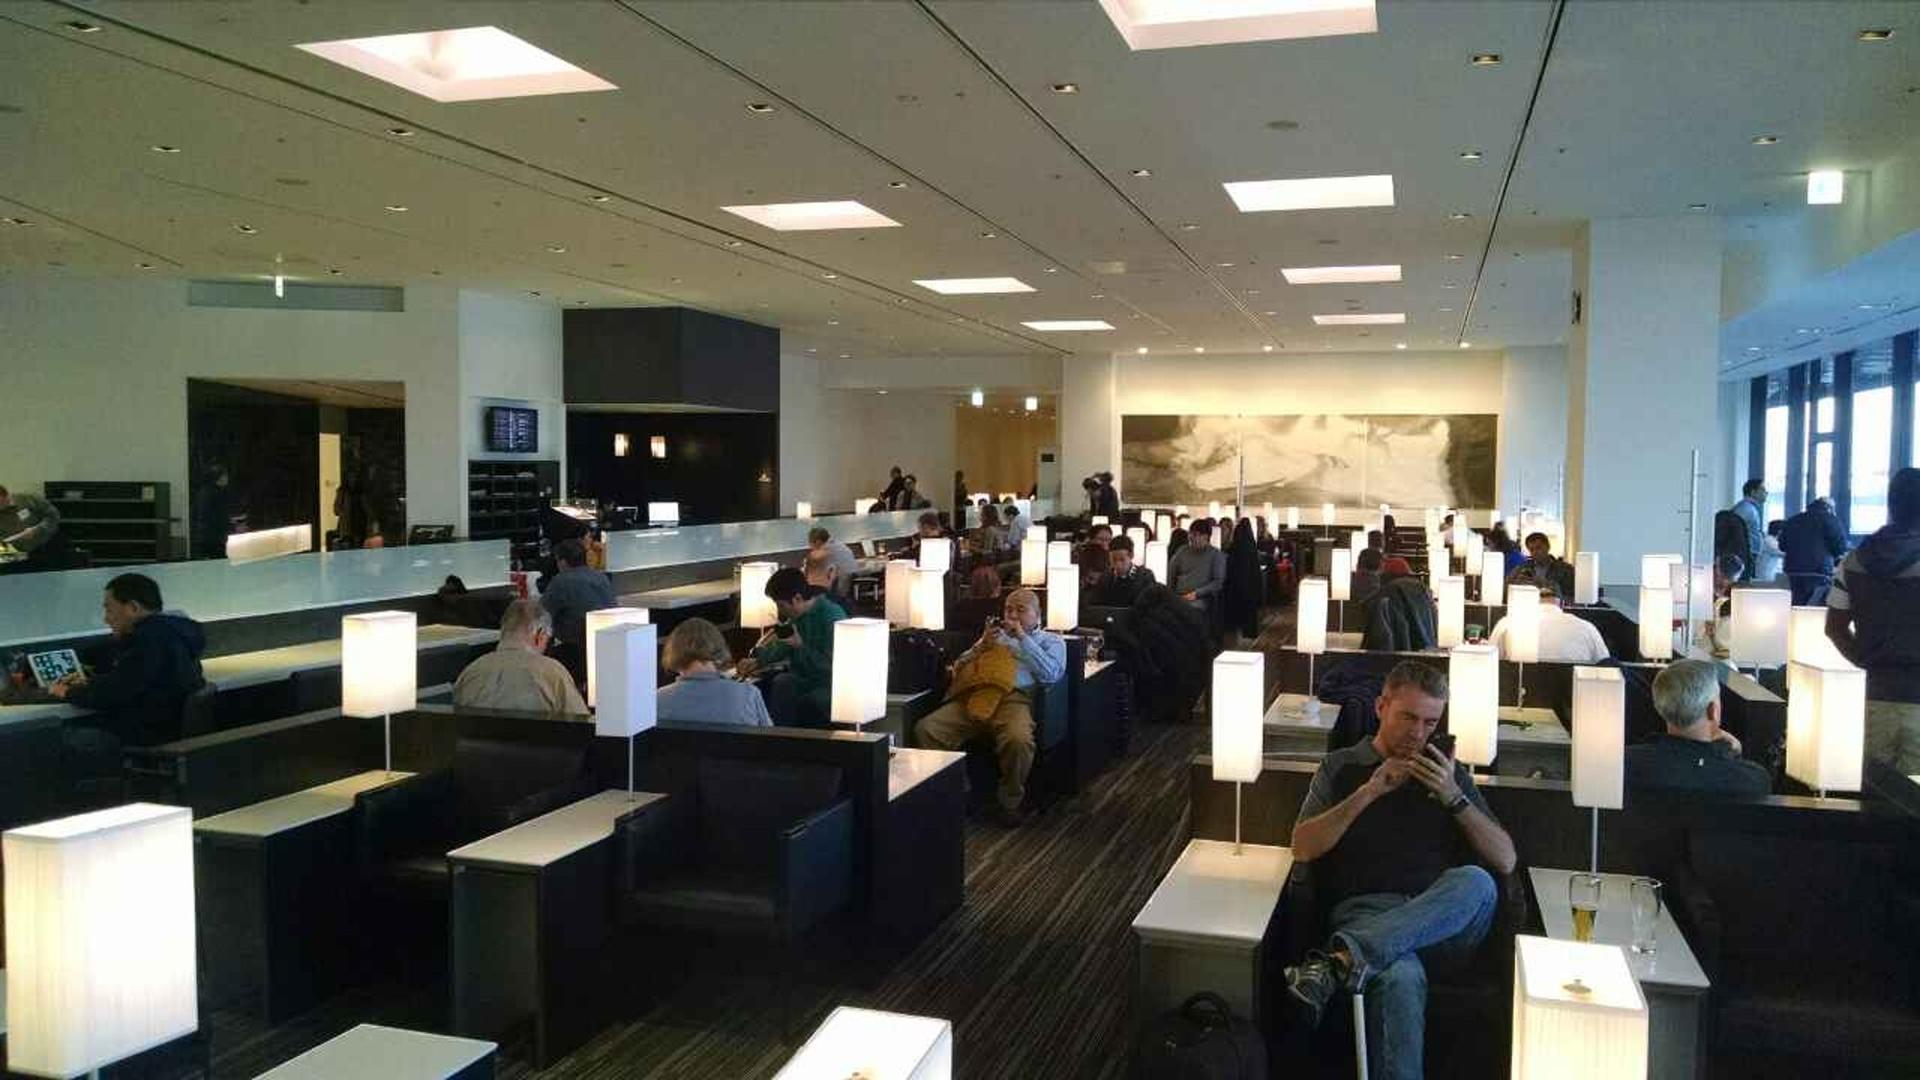 All Nippon Airways ANA Lounge image 30 of 39